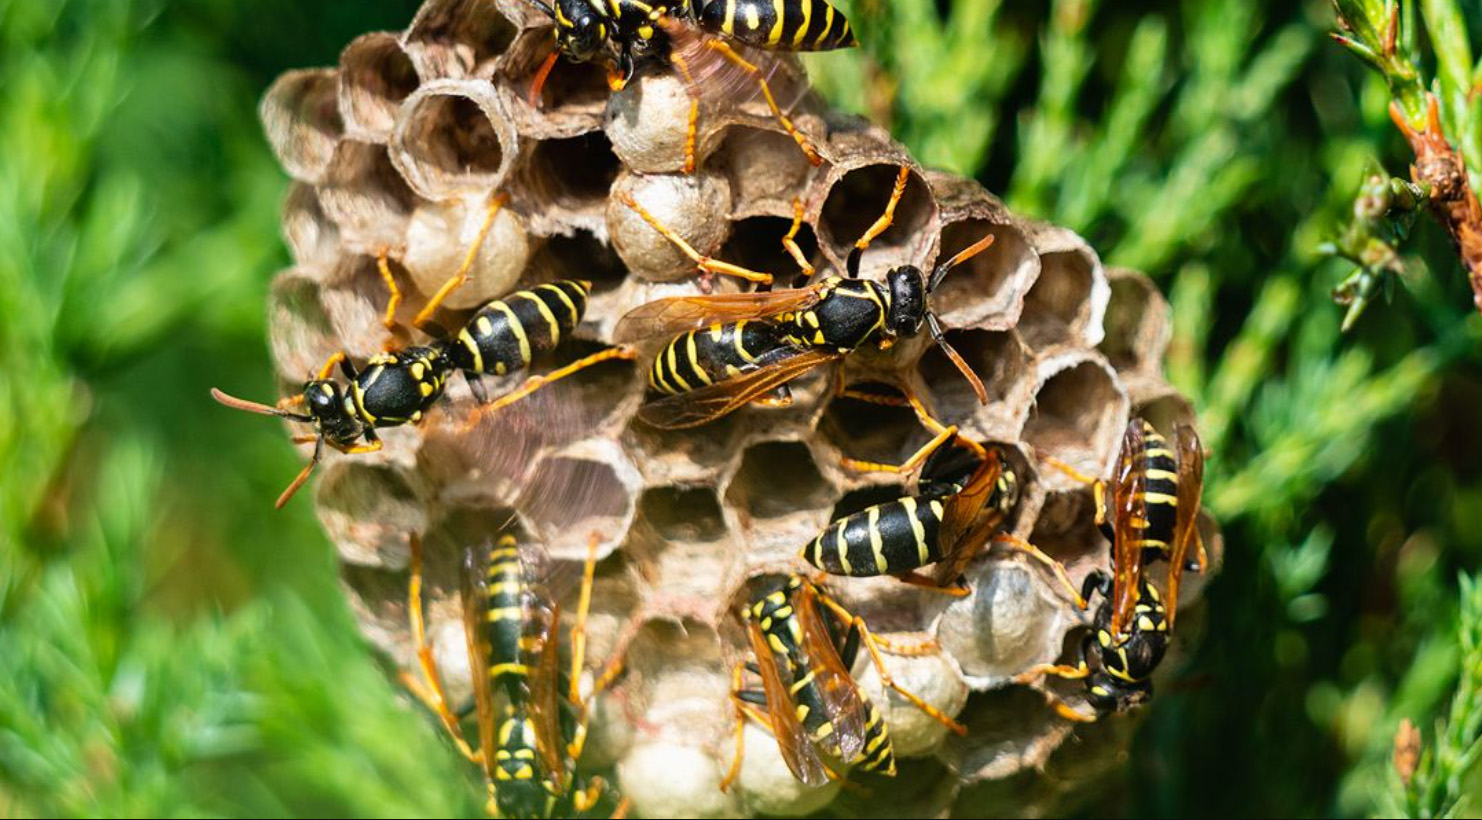 wasp removal west lothian wasp control